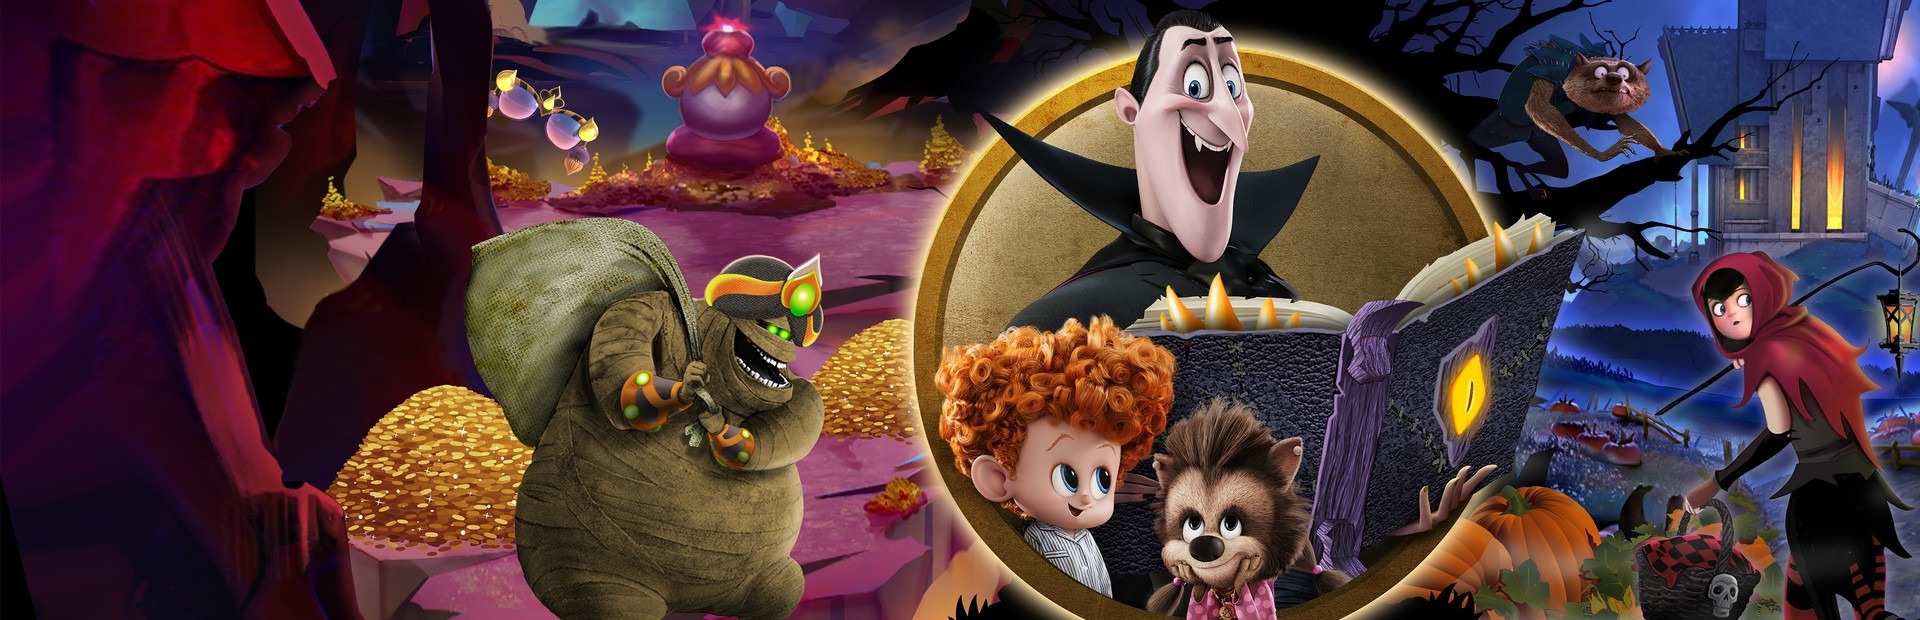 Hotel Transylvania: Scary-Tale Adventures. Scary tale